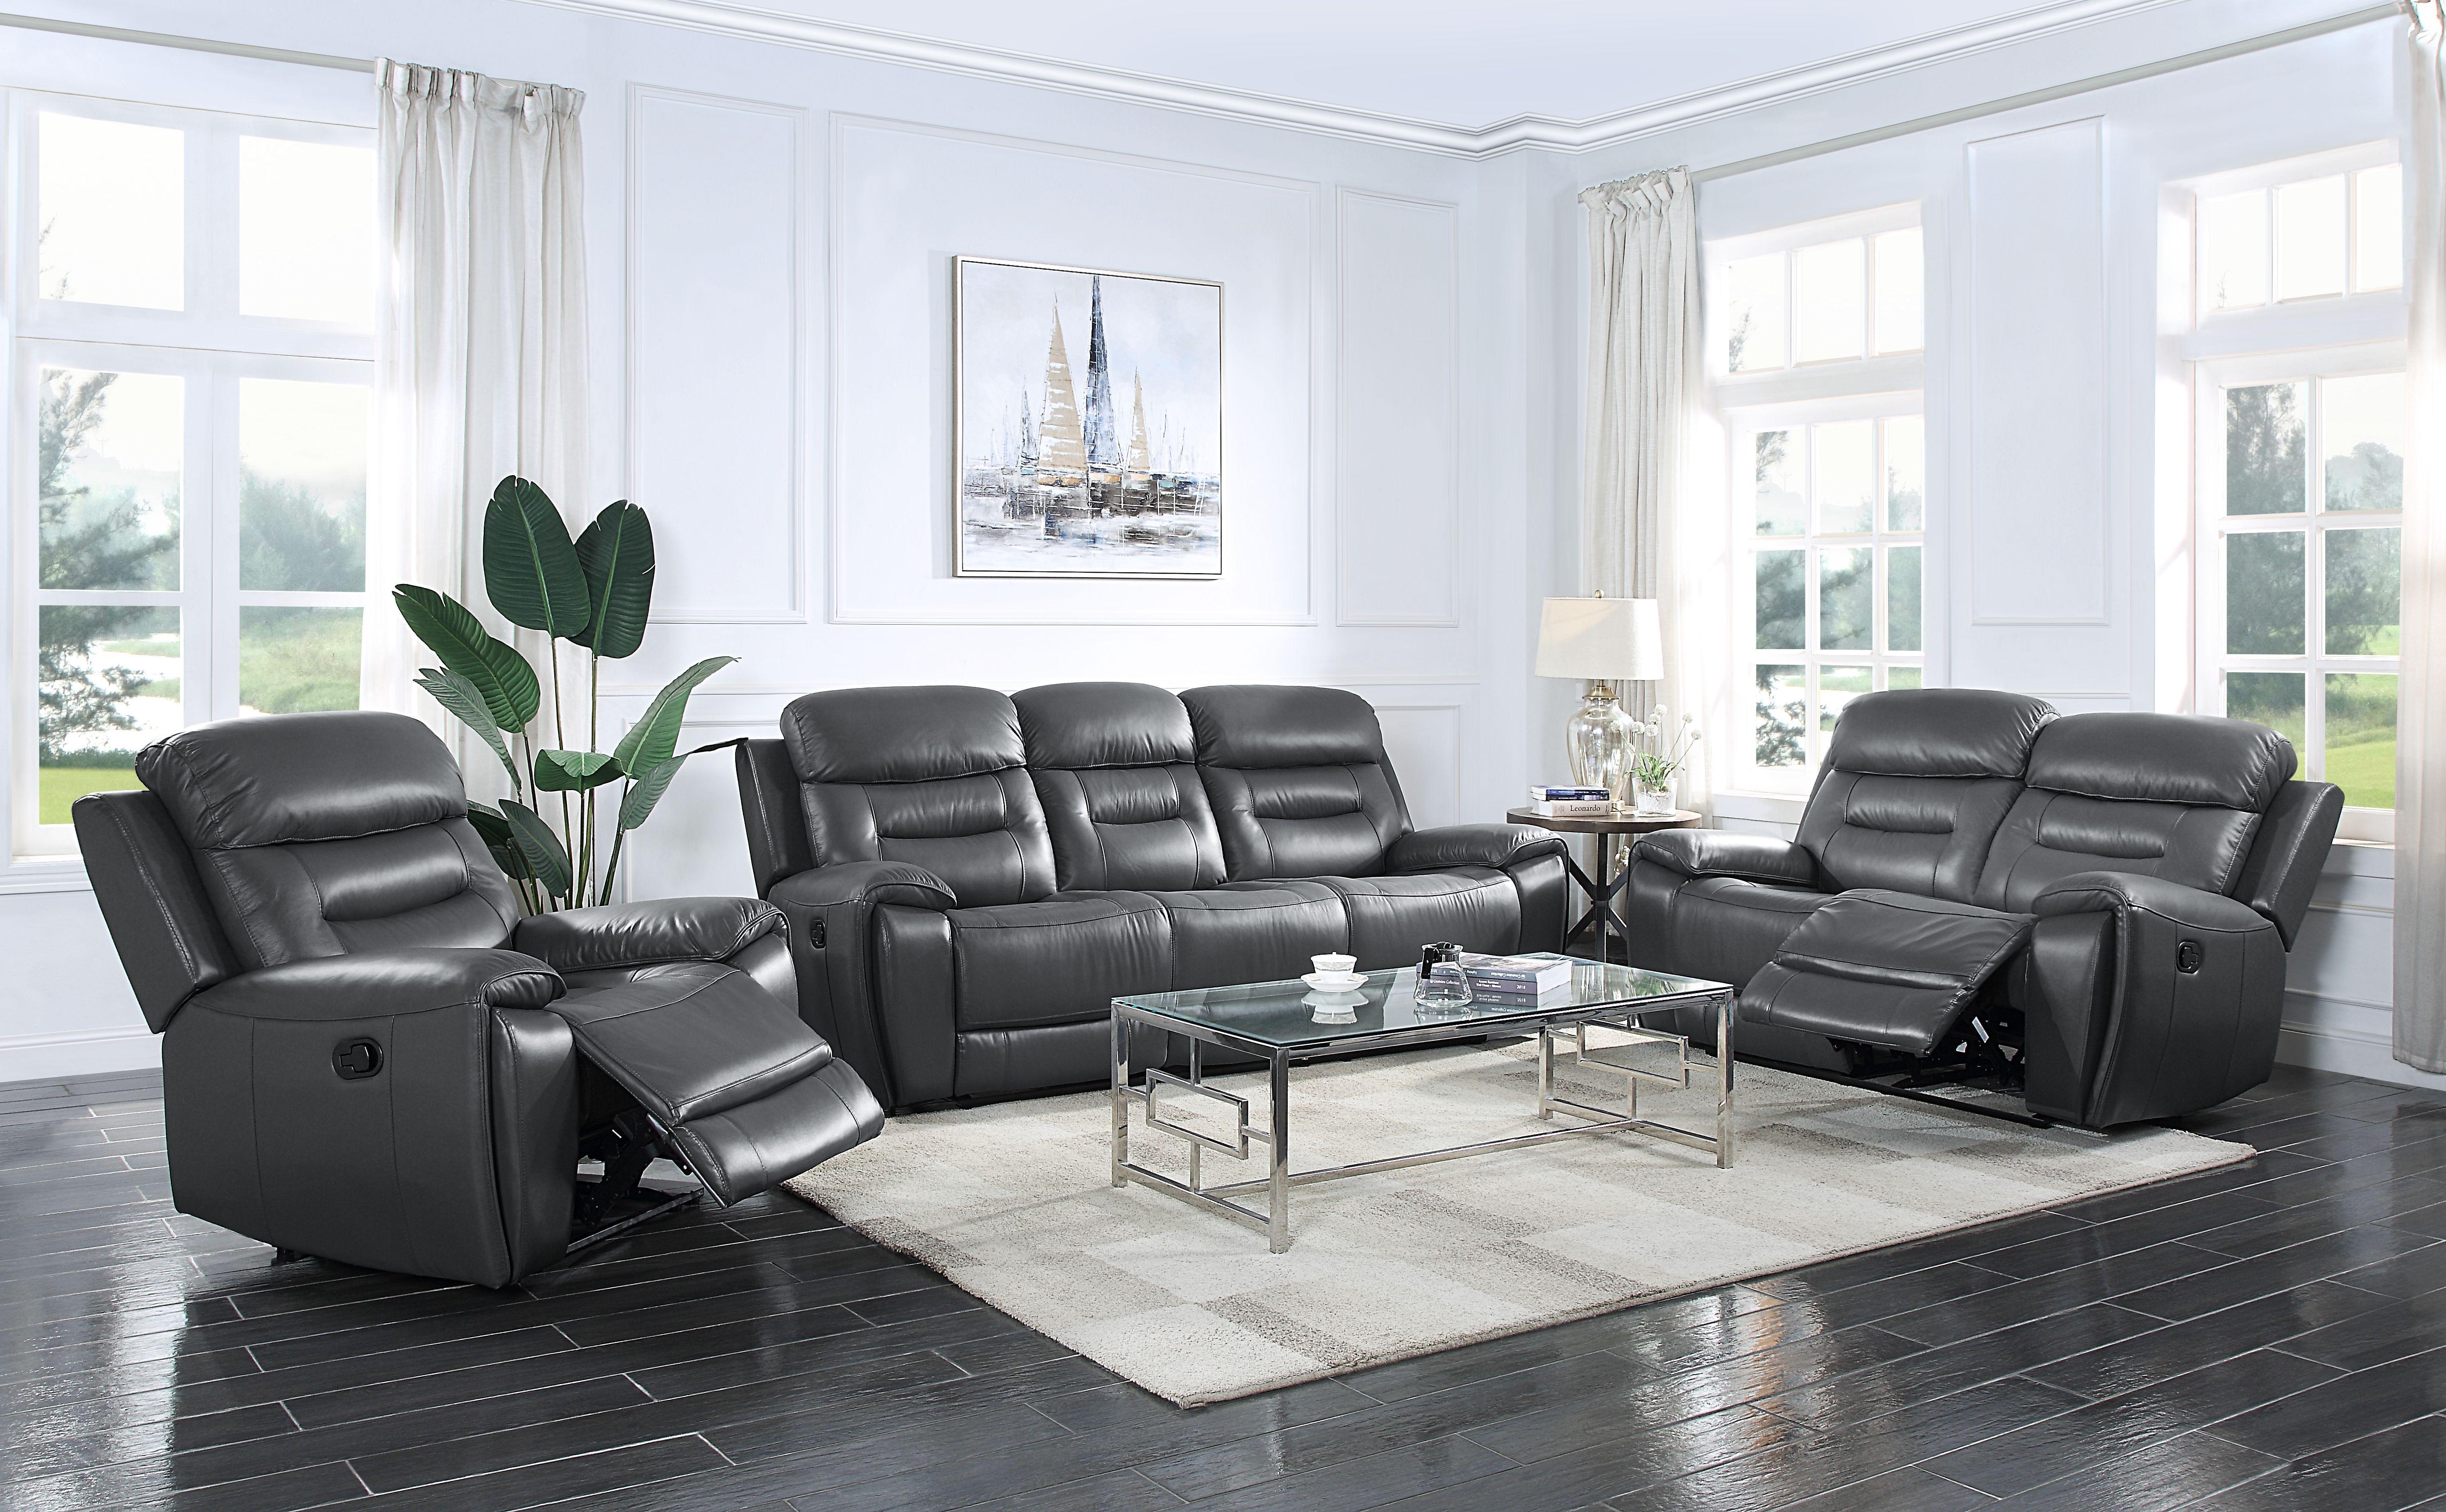 

    
Contemporary Gray Leather Sofa + Loveseat by Acme Lamruil LV00072-2pcs
